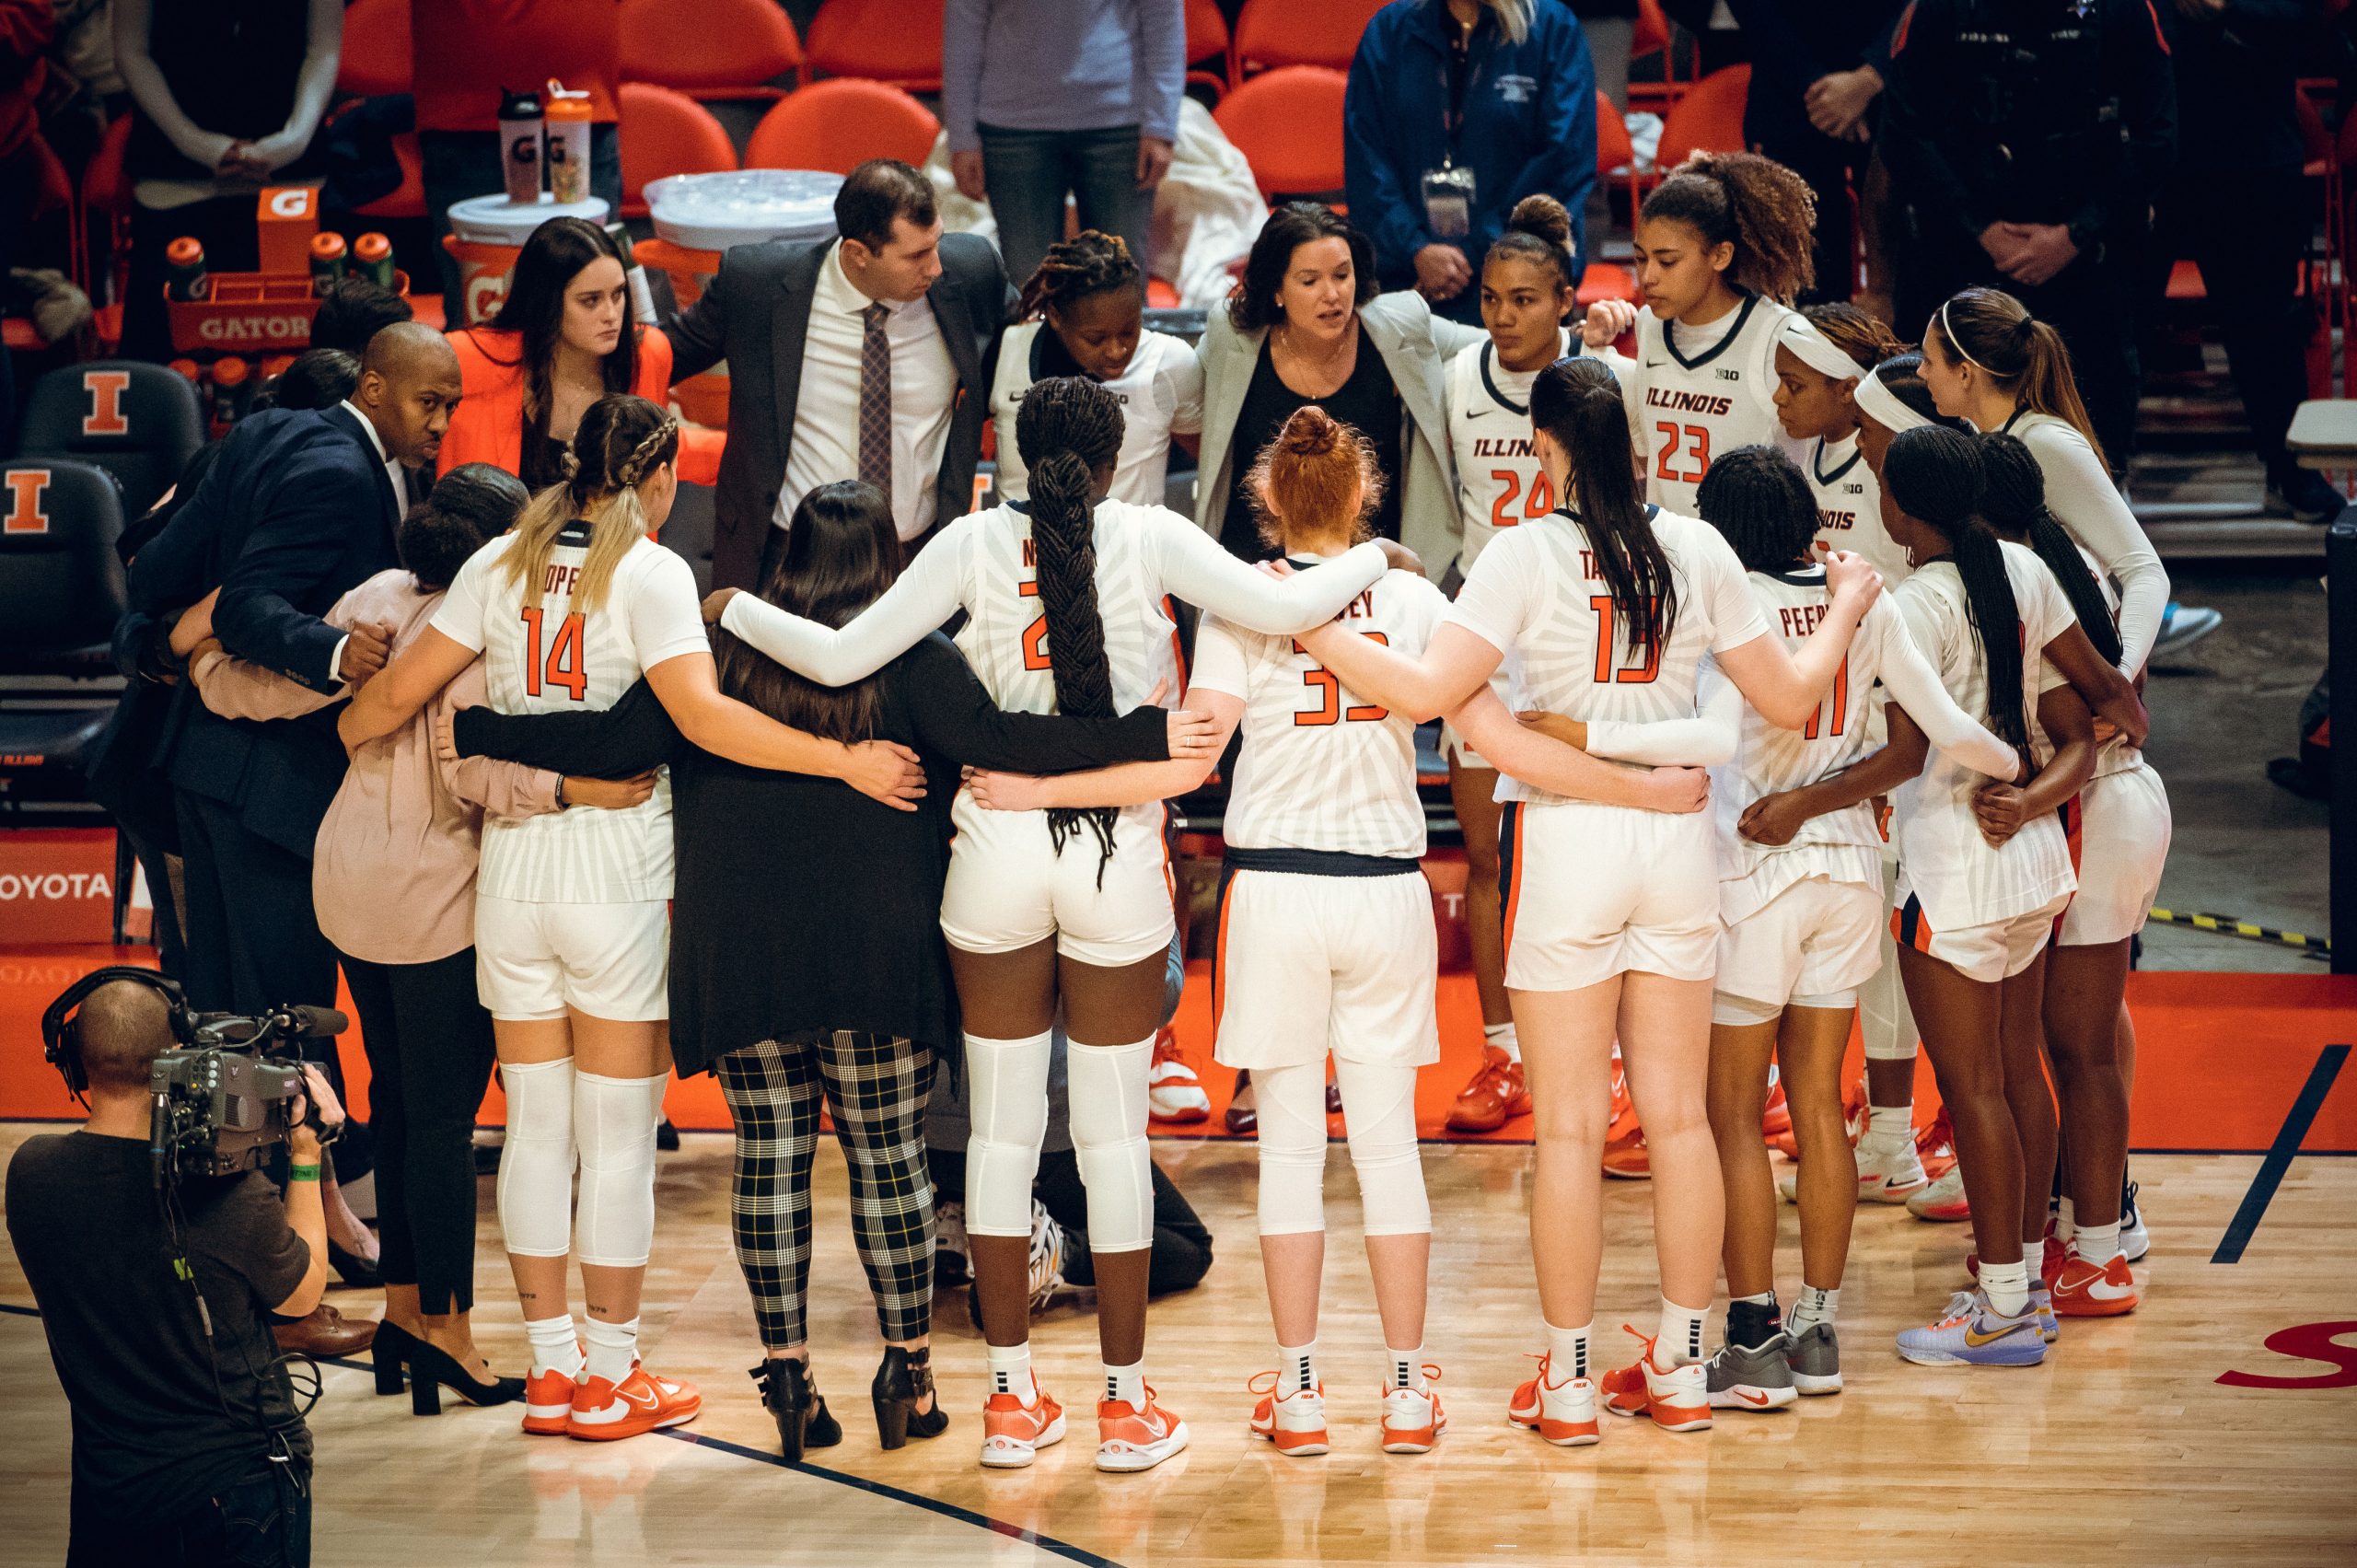 Illini Women’s Basketball Ranked in AP Top 25 Poll For First Time in 23 Years